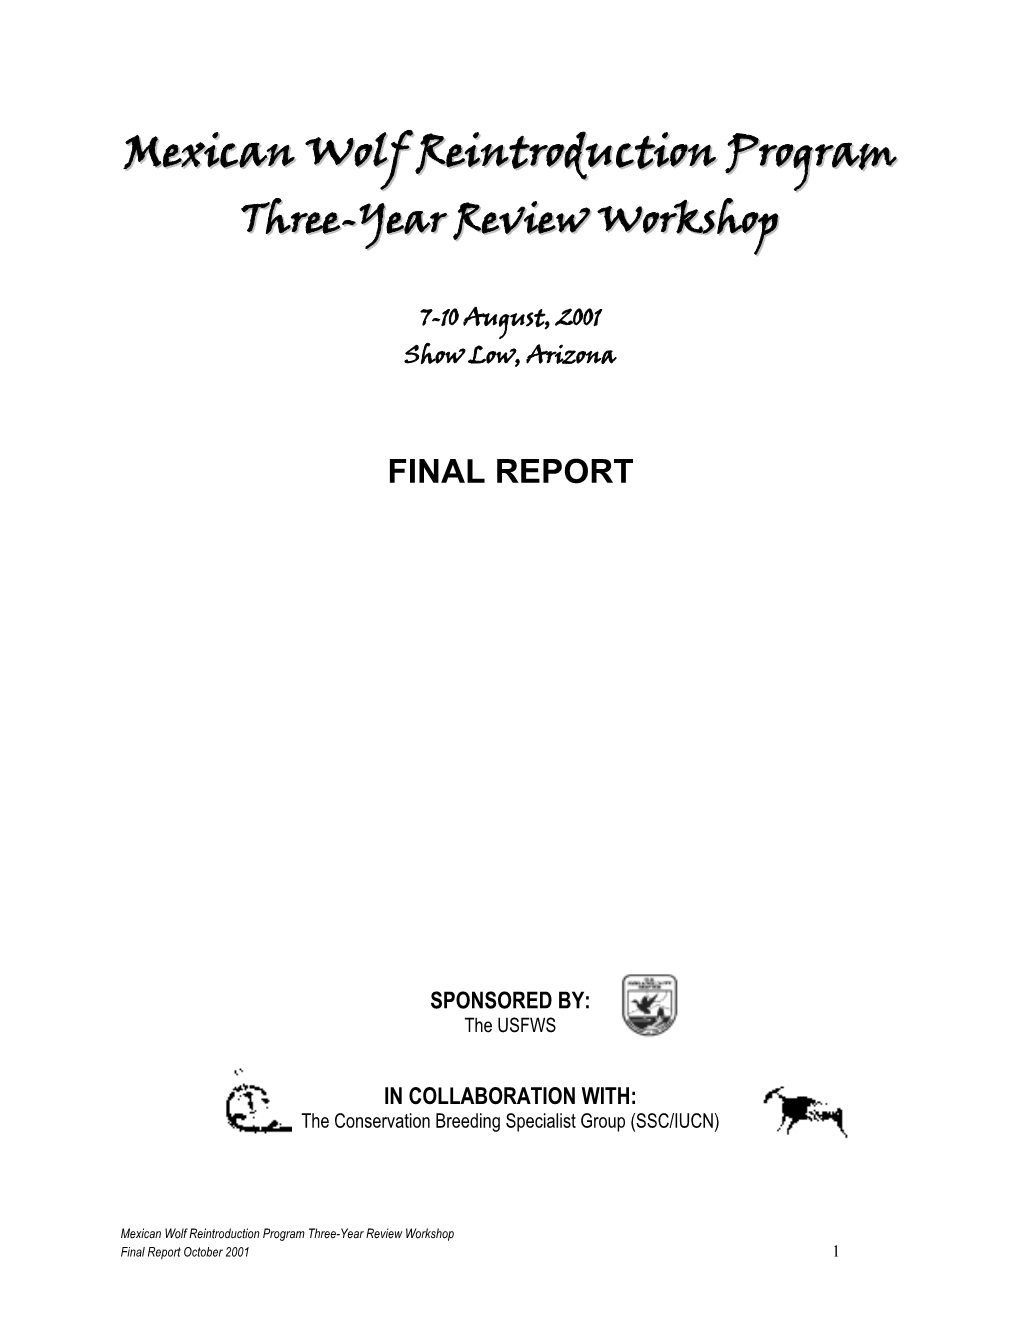 Mexican Wolf Reintroduction Program Three-Year Review Workshop Final Report October 2001 1